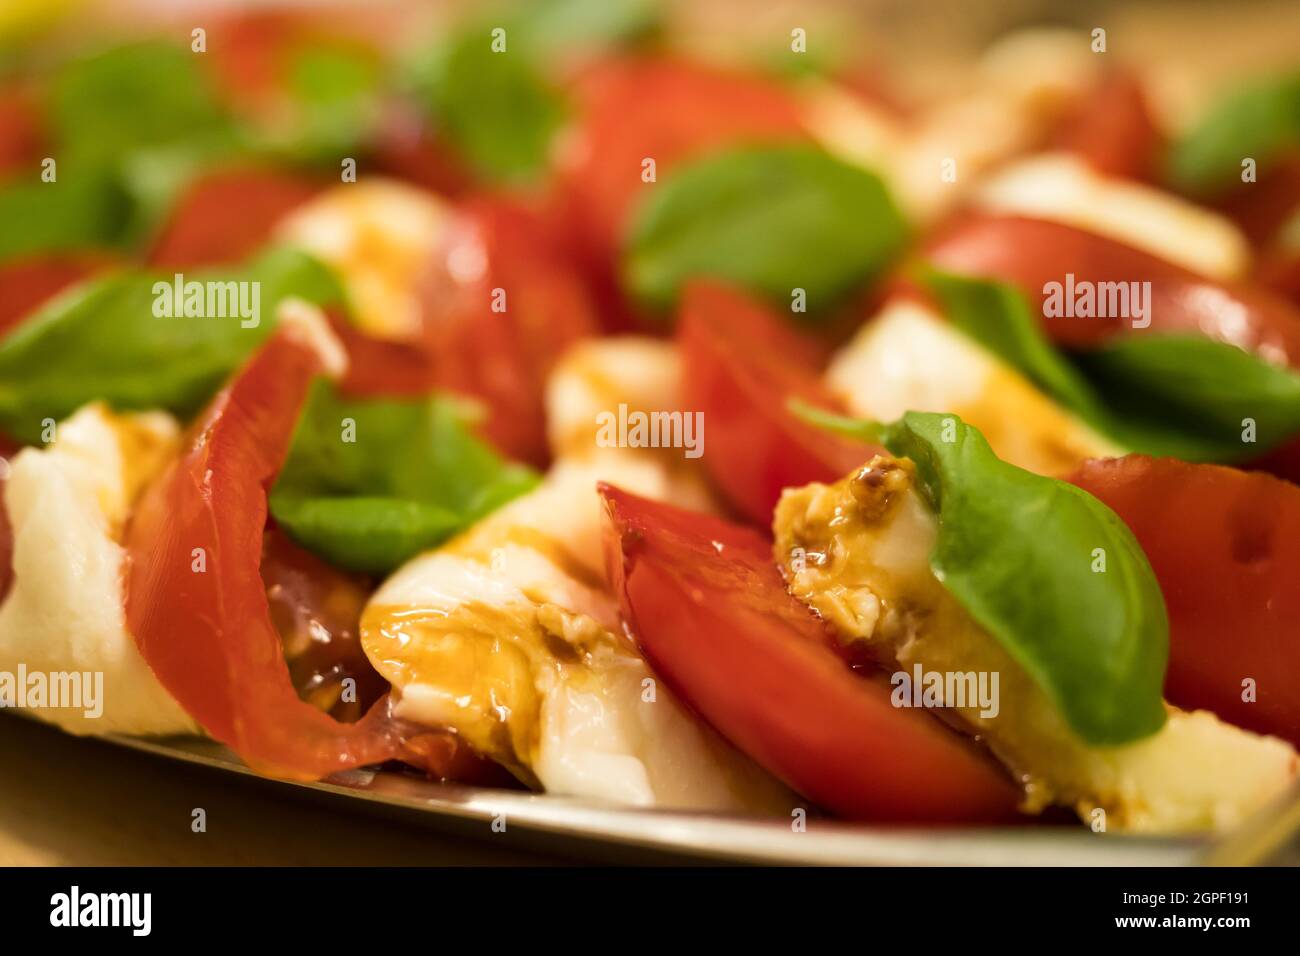 A side closeup of mediterran food on a plate Stock Photo